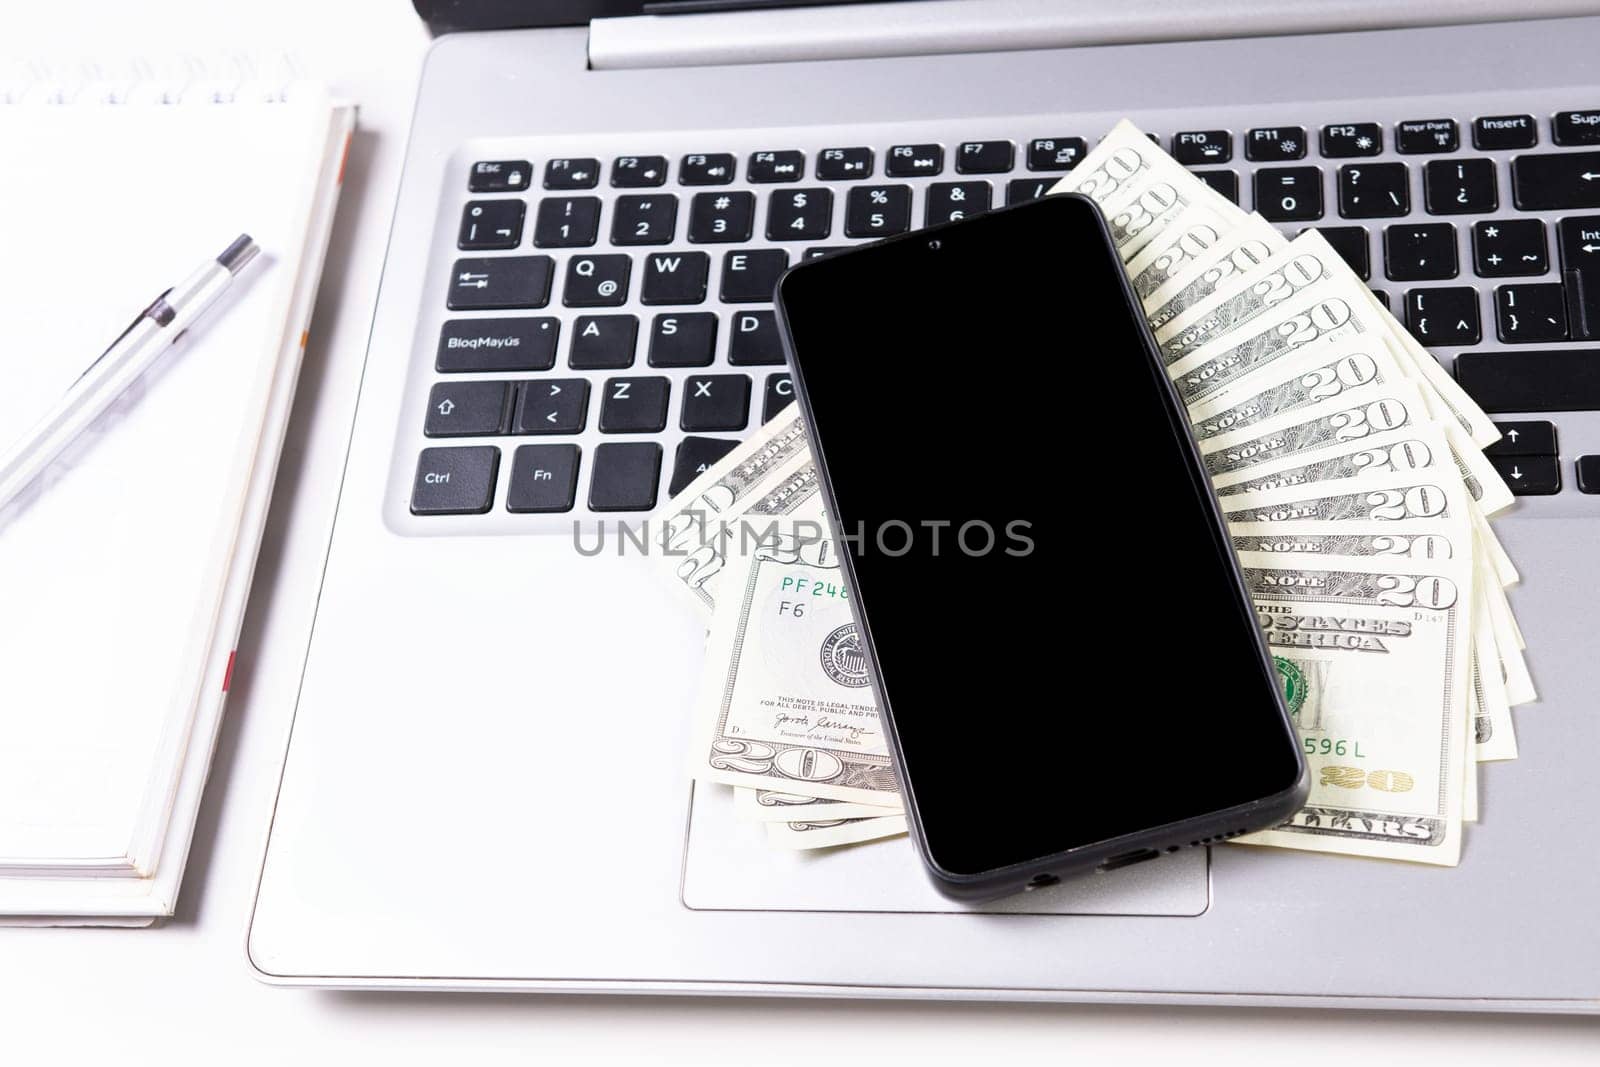 Mobile phone on top of dollar bills on laptop keyboard. Top view of laptop with cell phone and dollar bills. Cell phone on laptop keyboard and dollar bills by isaiphoto